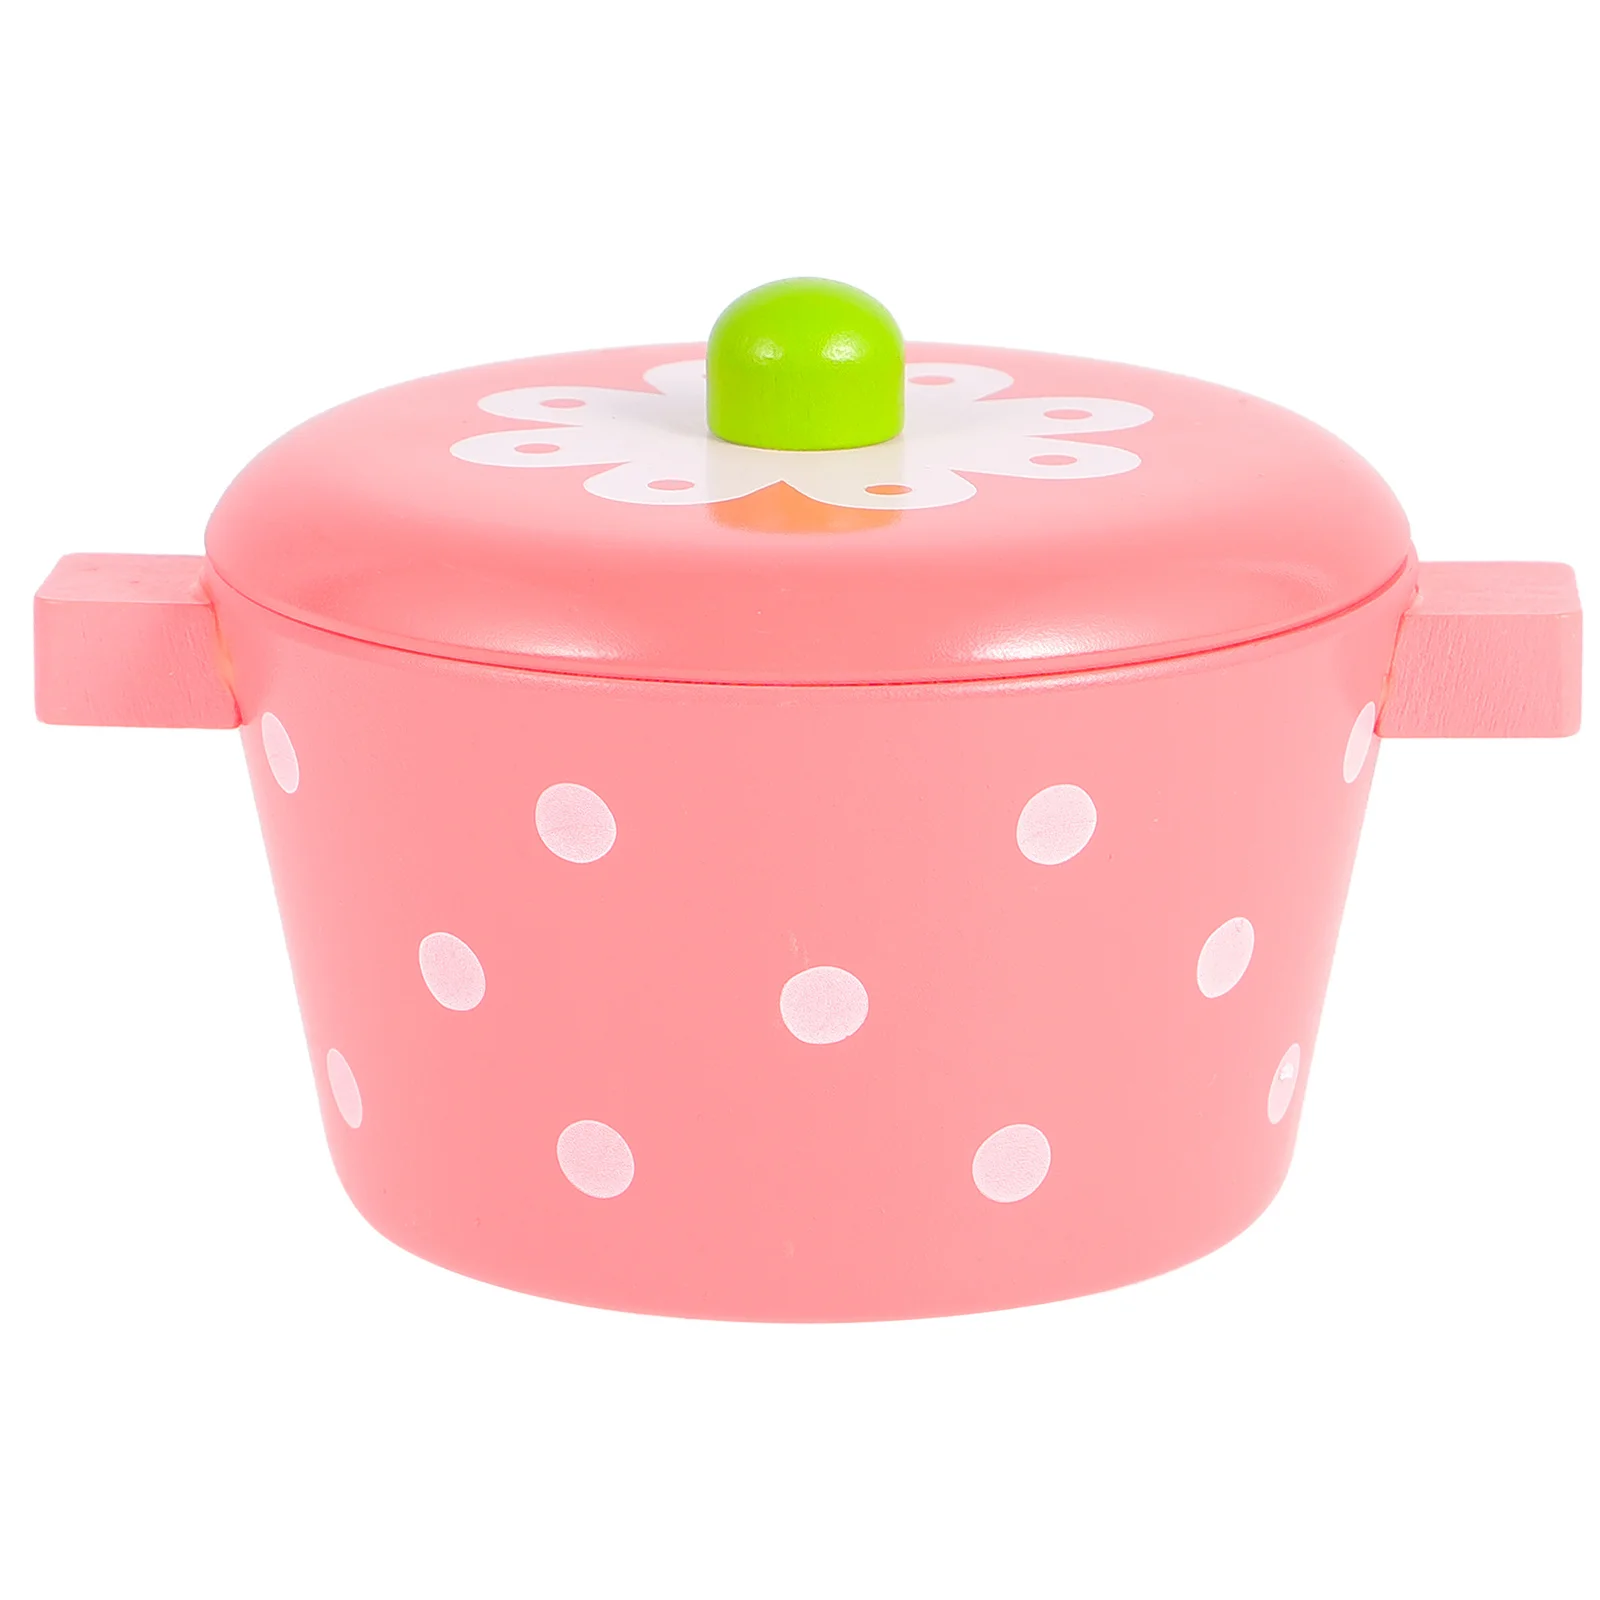 

Play House Kitchen Utensils Mini Cookers Children Cookwares Micro Toys Rice Simulation Pots Flowerpot Kids